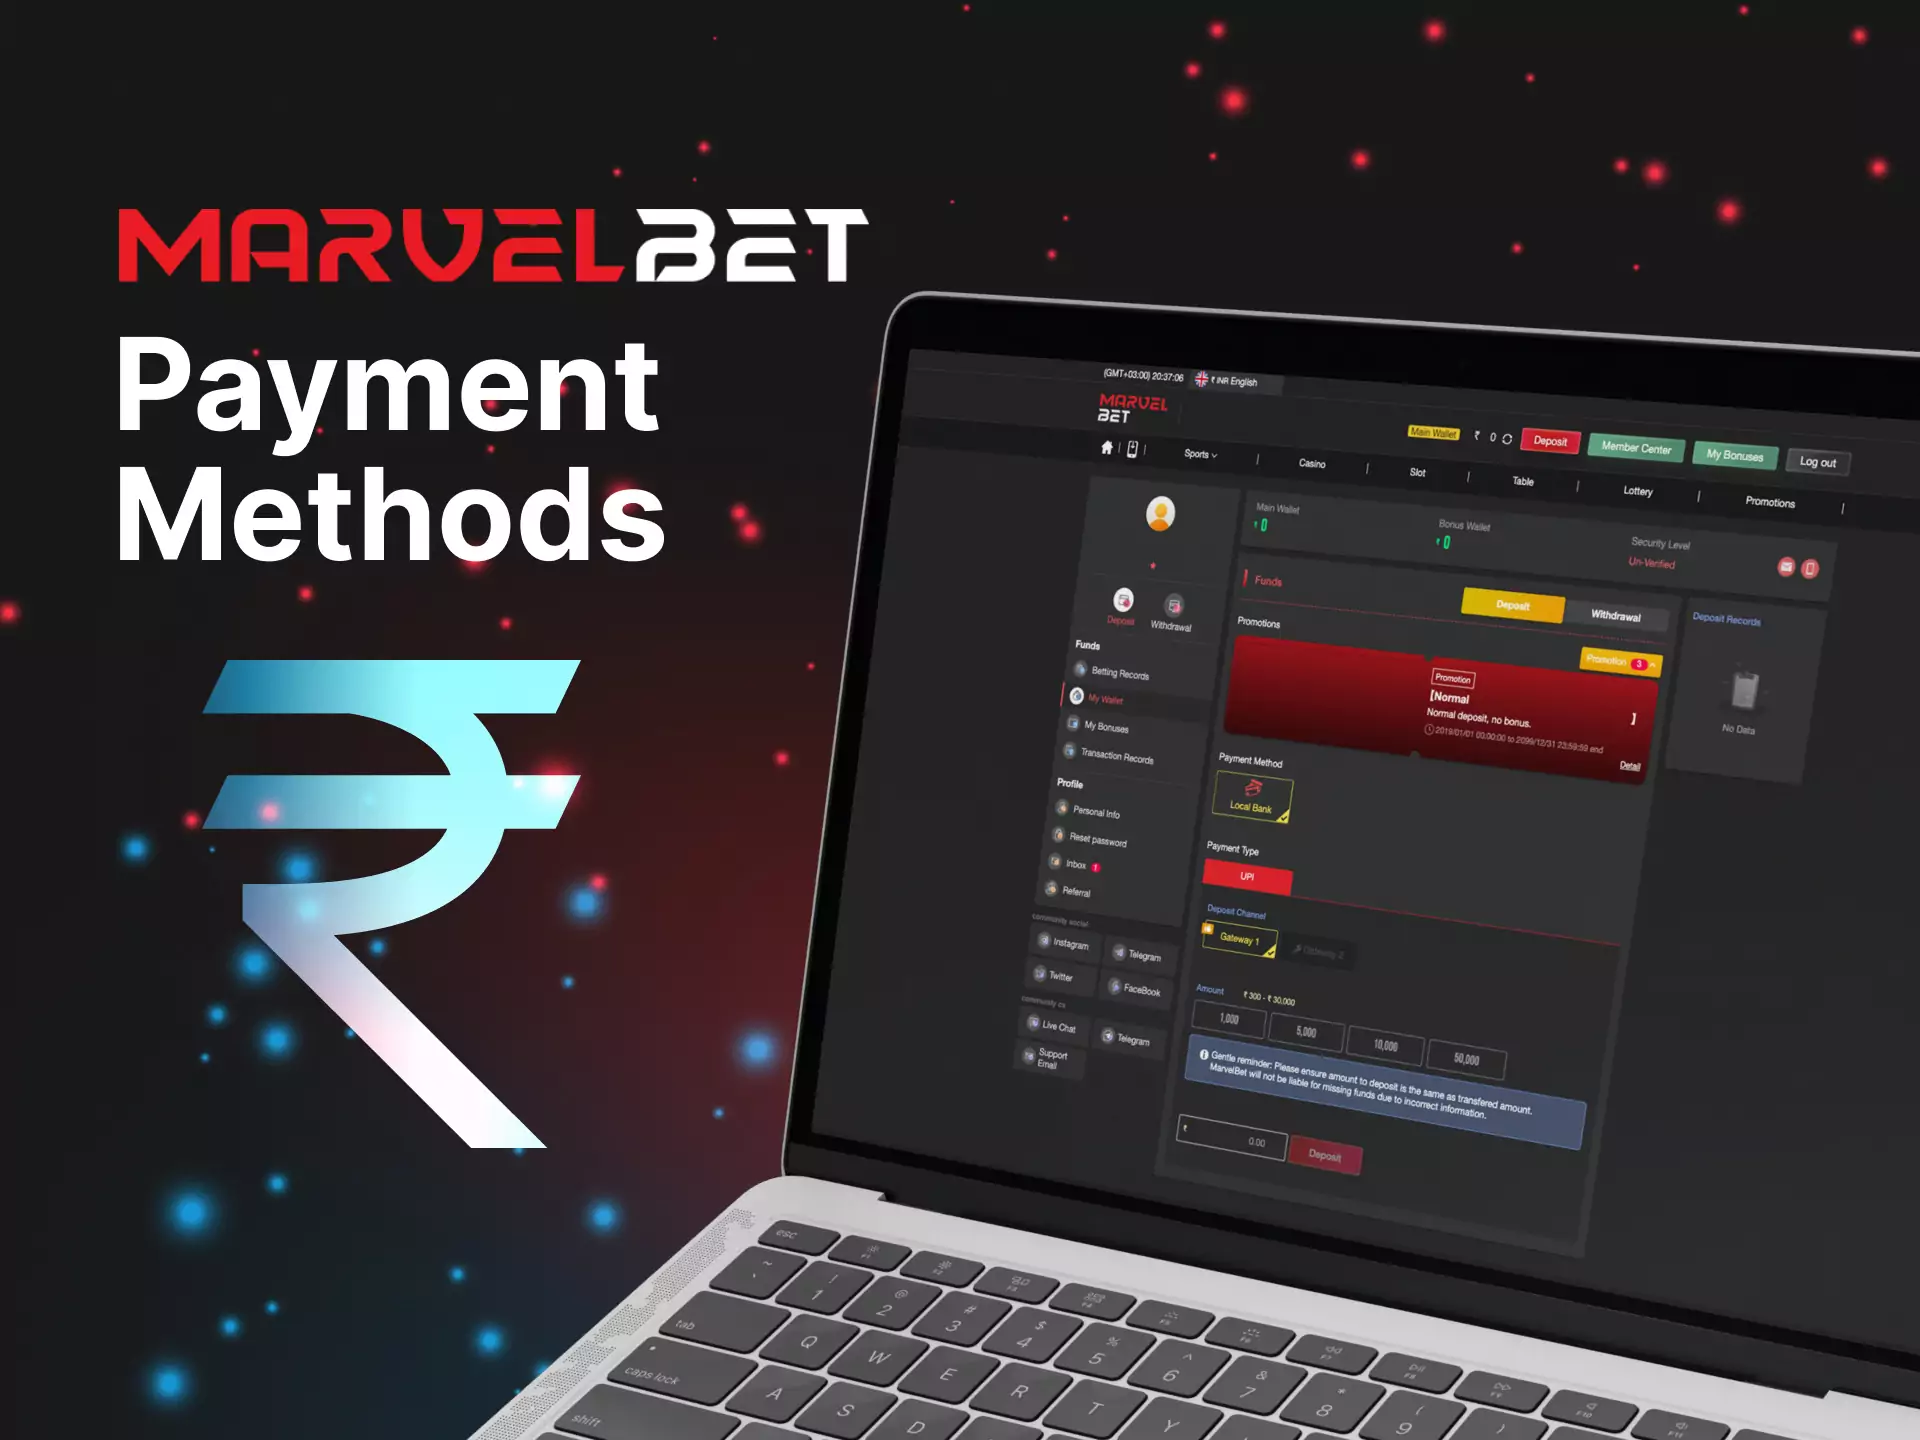 On Marvelbet, you can top up your account with any available payment method.